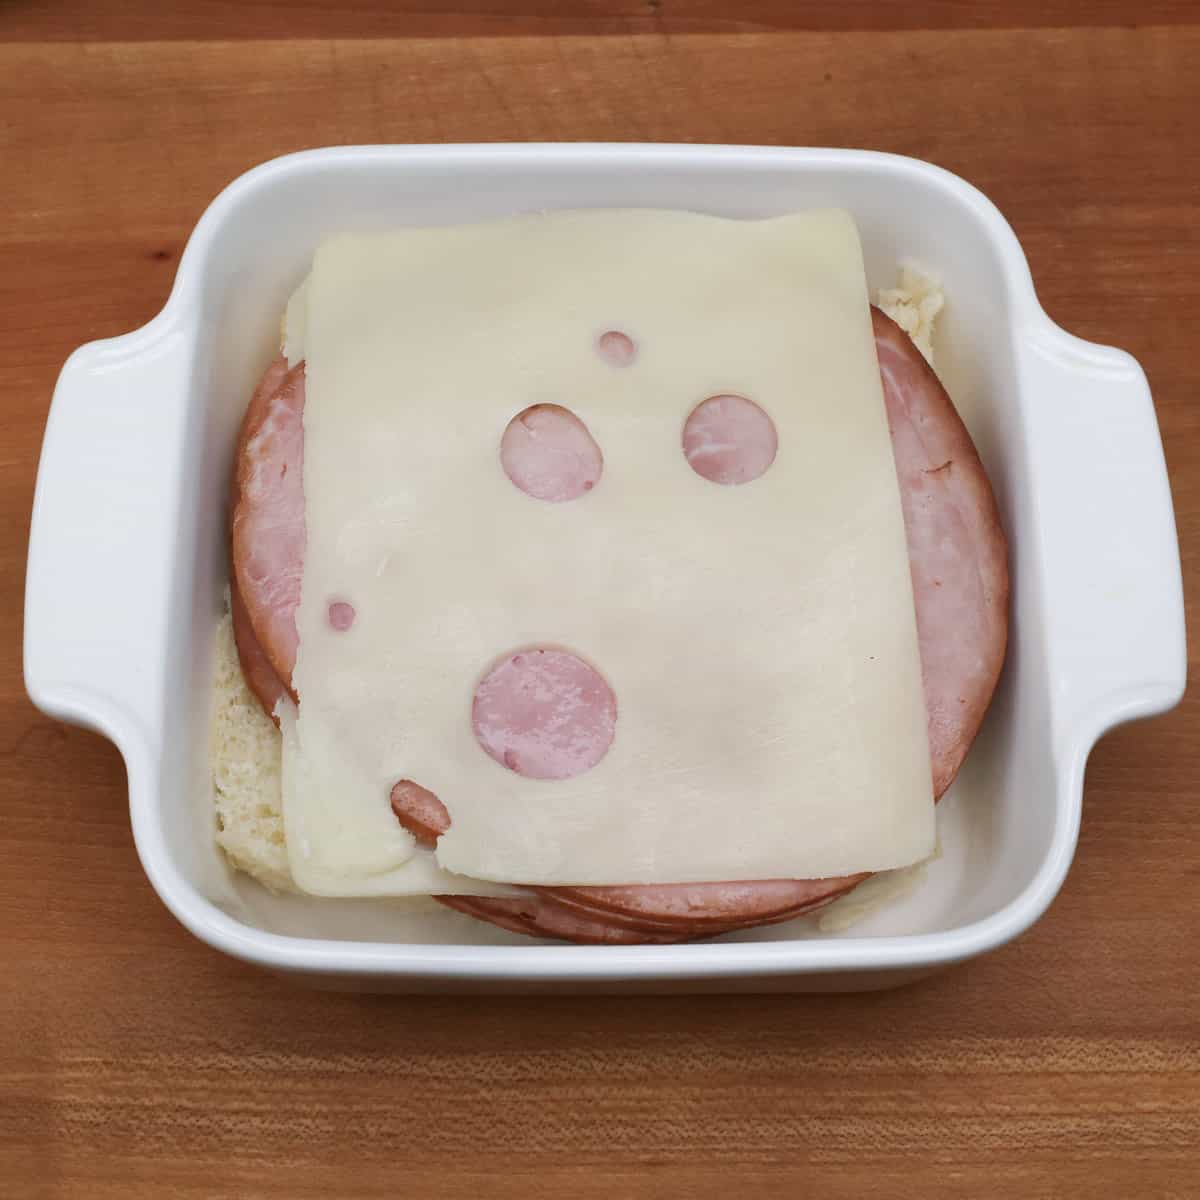 layering ham and cheese slices over the bottom half of Hawaiian rolls in a small baking dish.